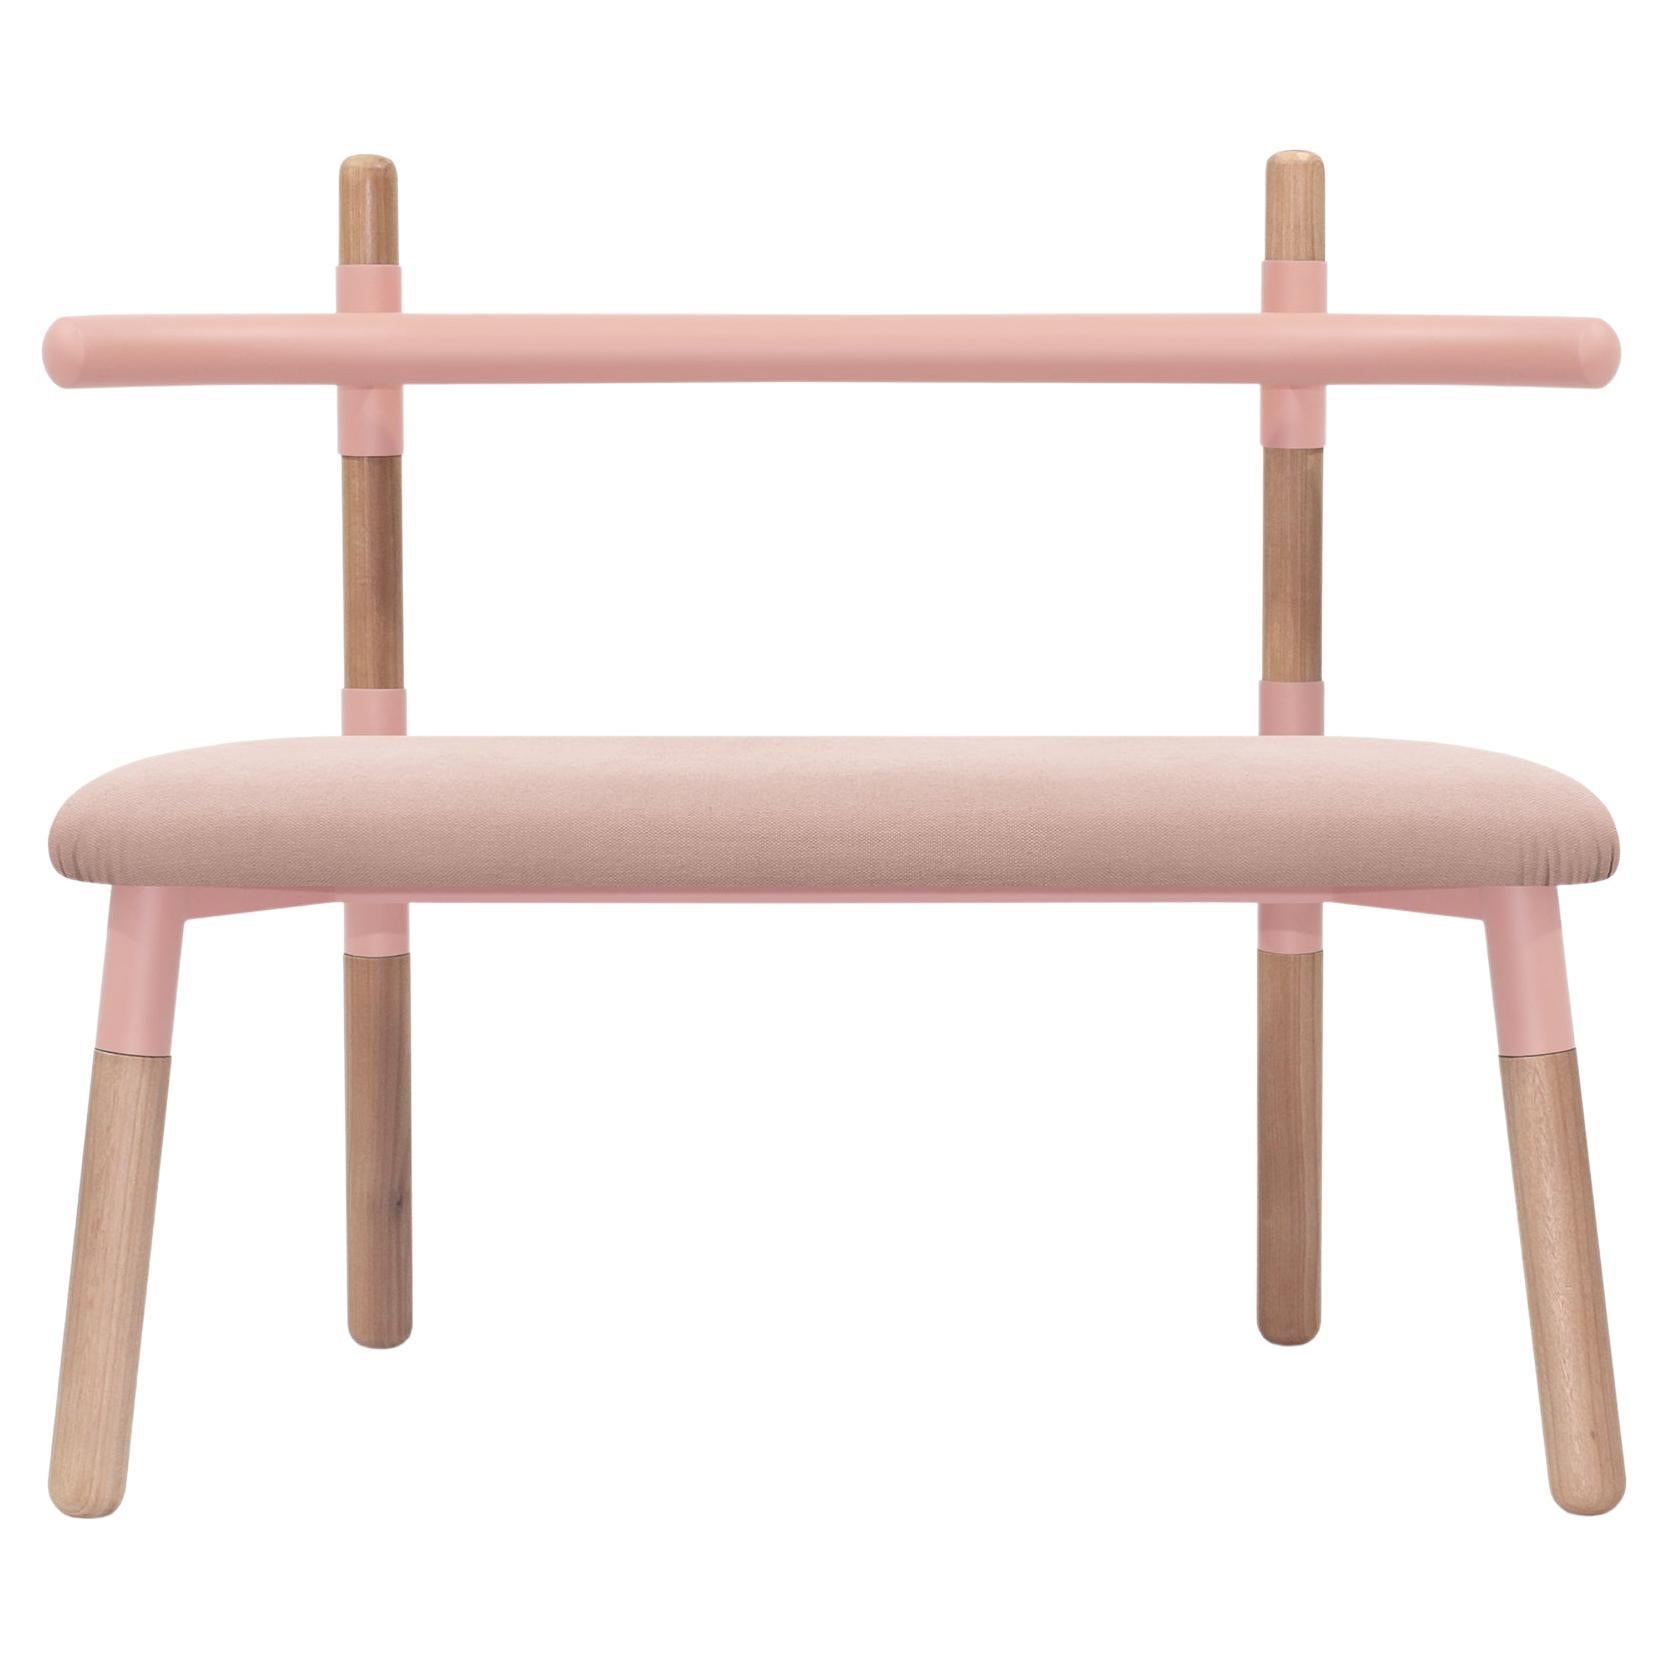 Upholstered PK14 Double Chair, Steel Structure and Wood Legs by Paulo Kobylka